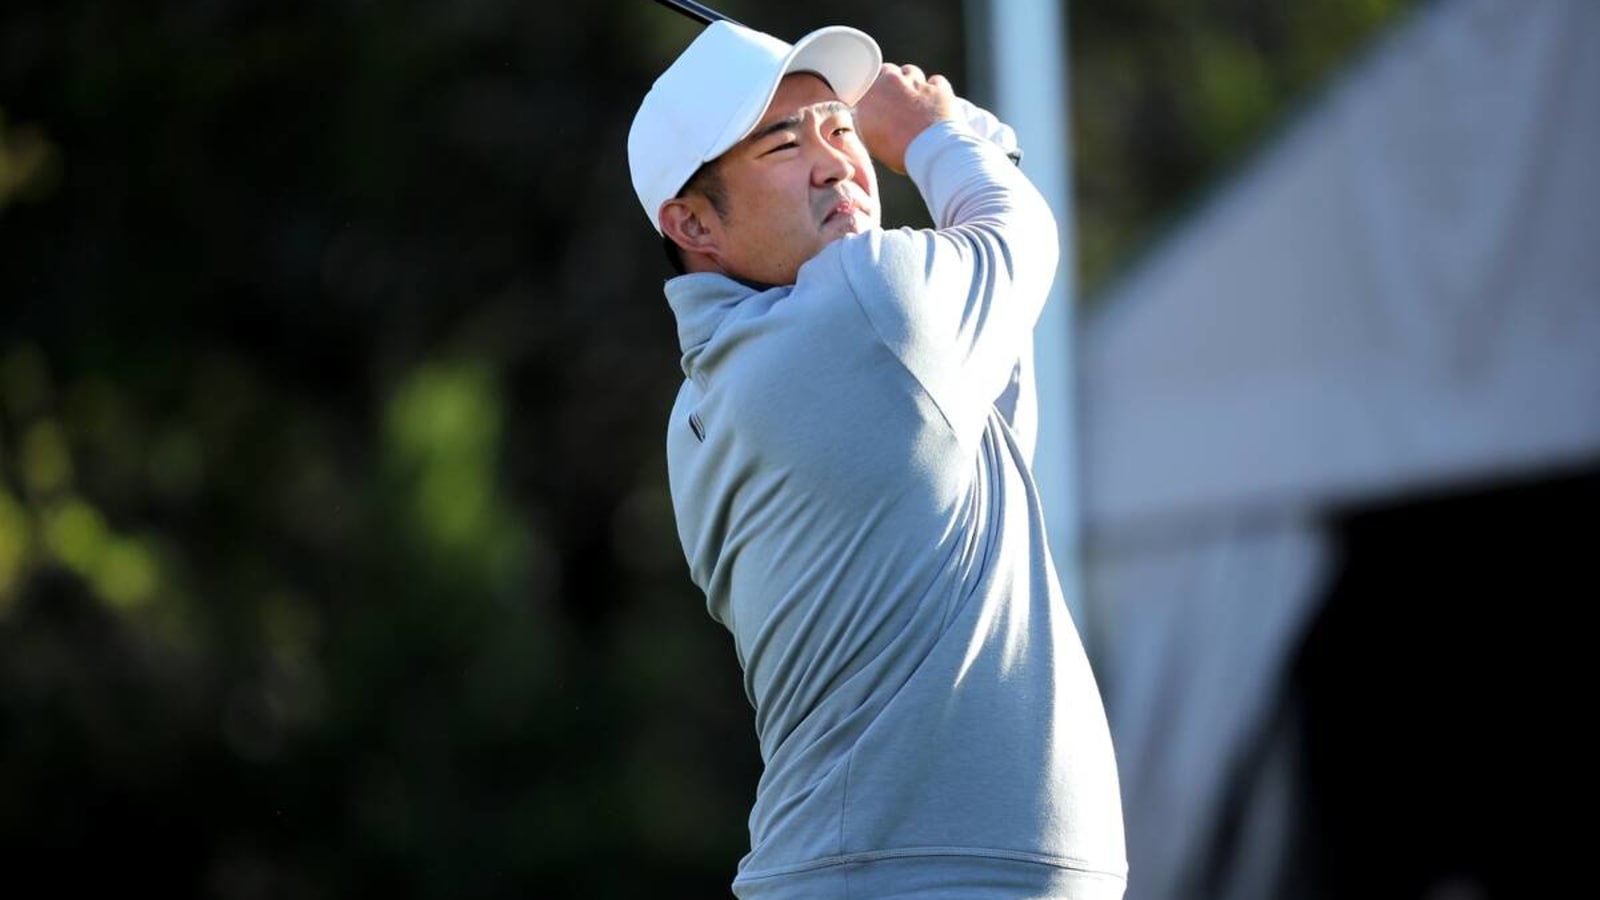 John Huh at the Wells Fargo Championship Live: TV Channel & Streaming Online